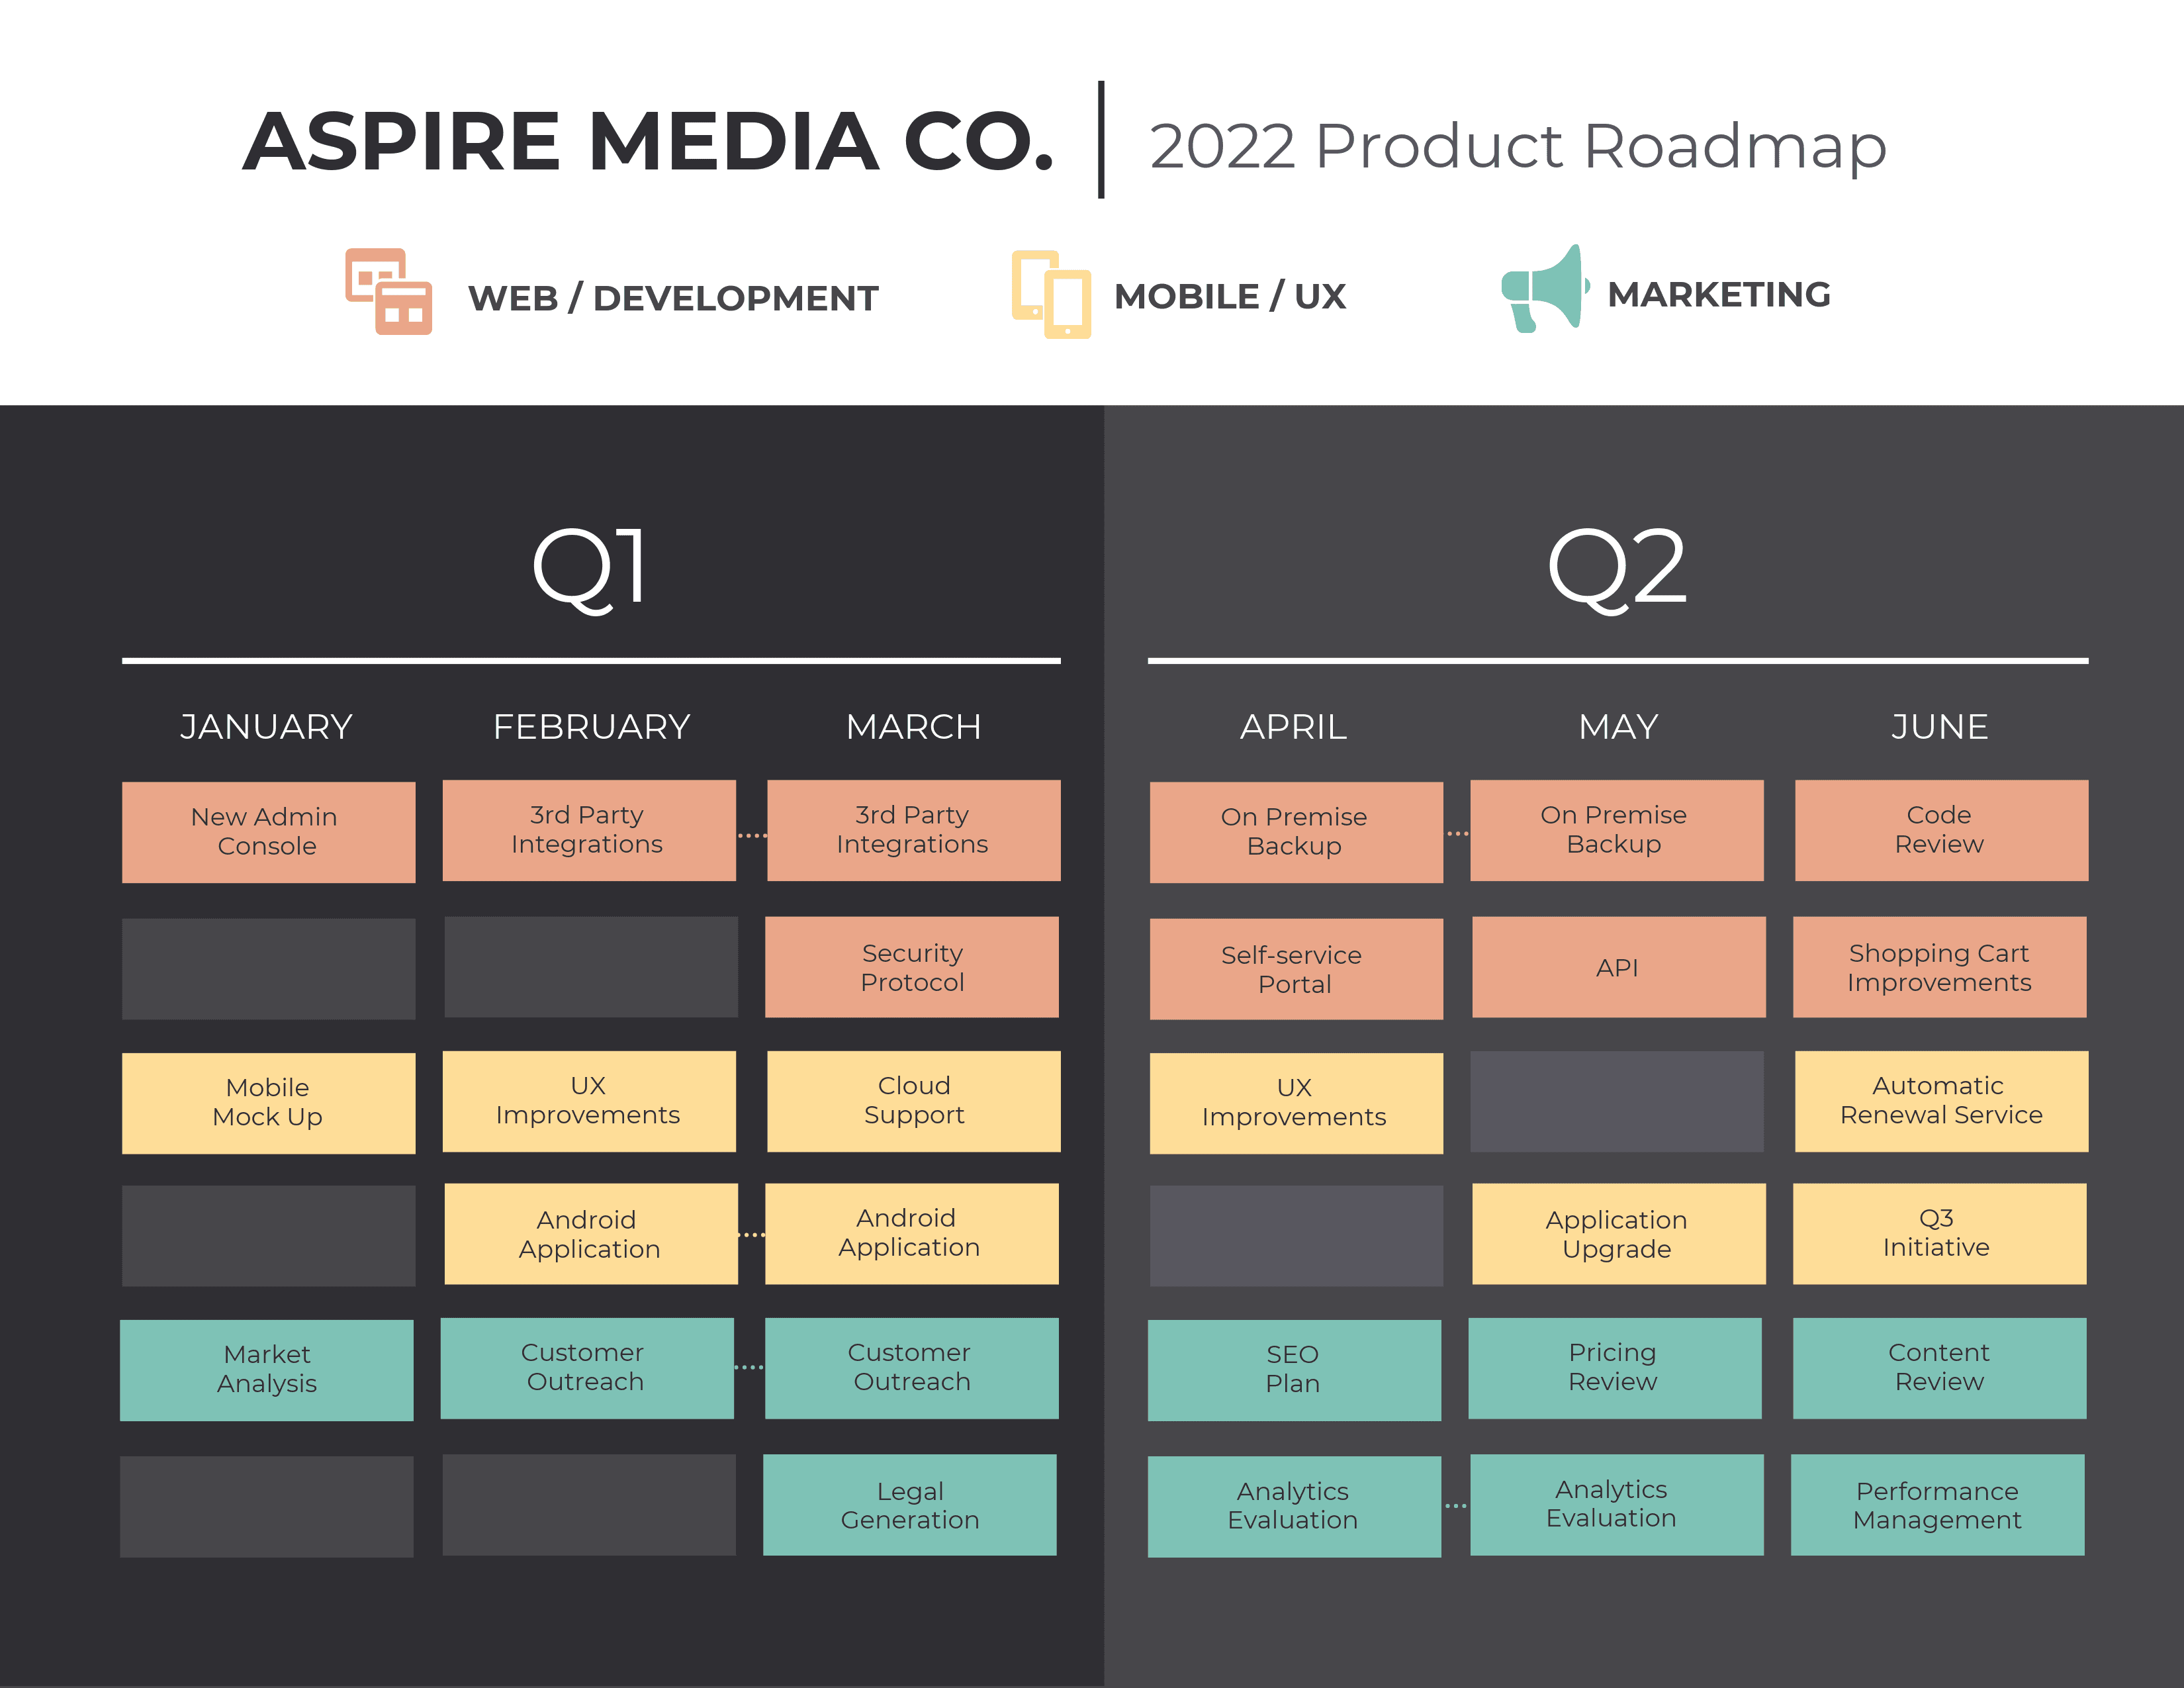 2022 Product Roadmap for Aspire Media Co. The roadmap is divided into quarters and months, detailing various web development, mobile/UX, and marketing initiatives. Q1 includes tasks like new admin console, 3rd party integrations, and security protocol. Q2 focuses on on-premise backup, API, and shopping cart improvements among others. Each month lists specific projects such as UX improvements, customer outreach, and market analysis.